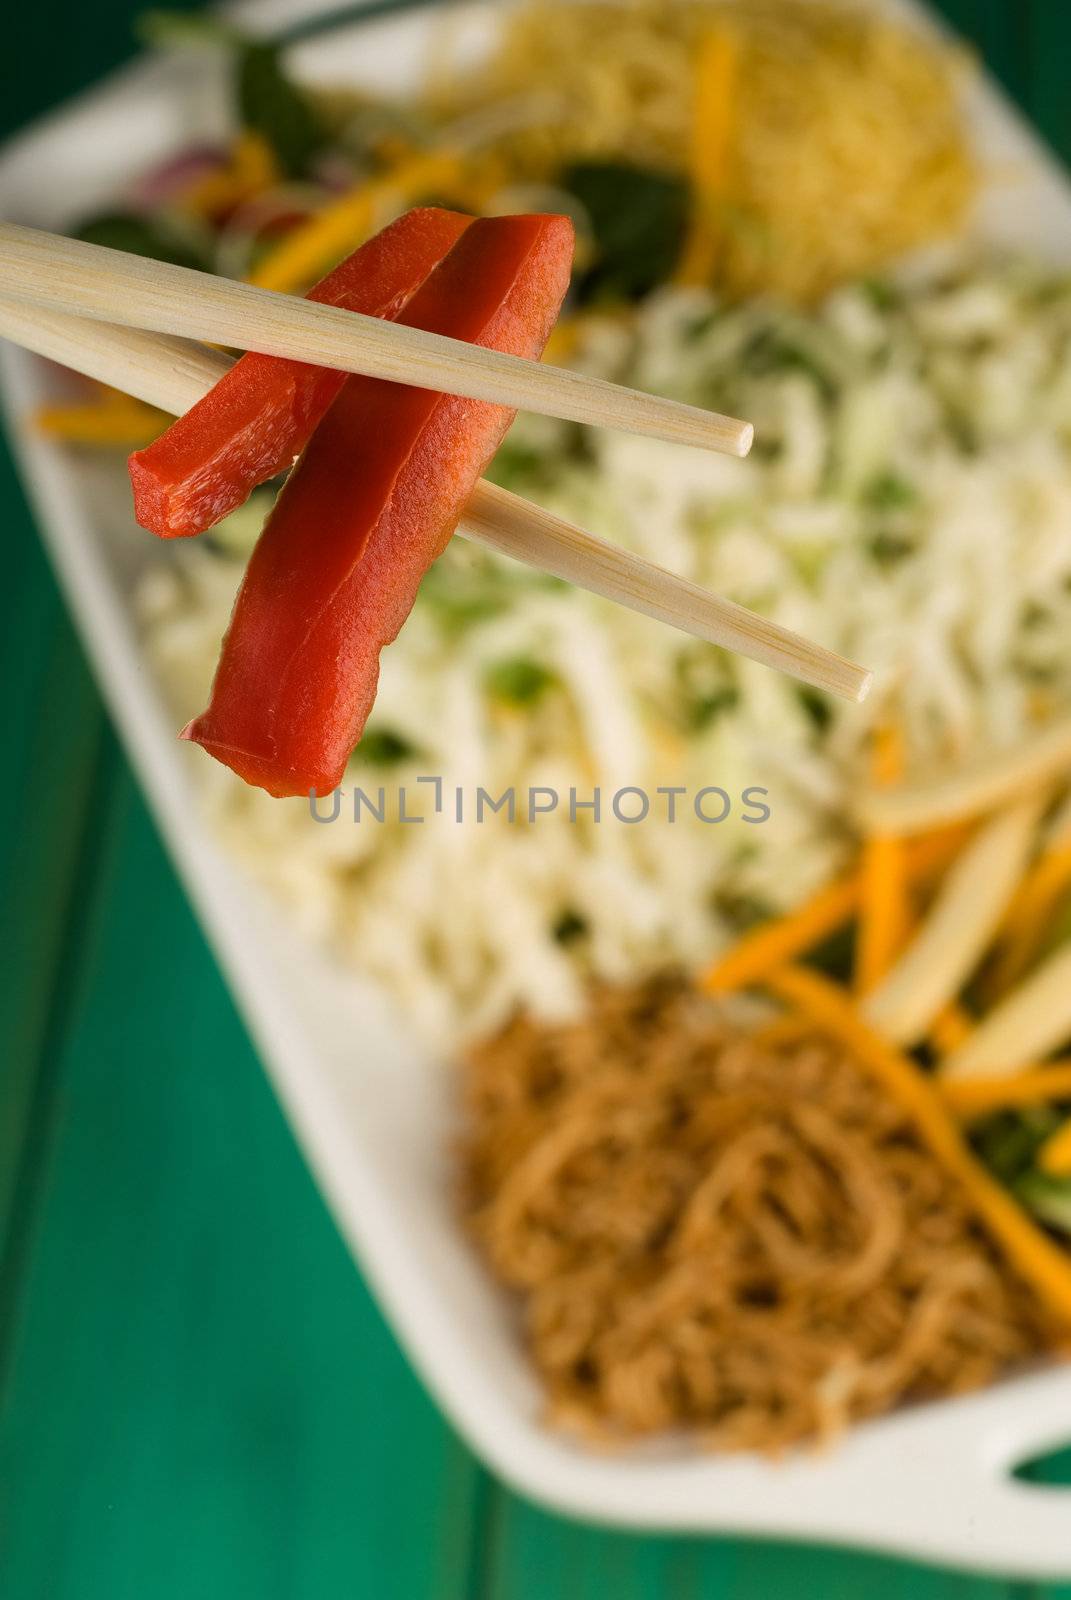 Chopsticks and stir fry by alistaircotton